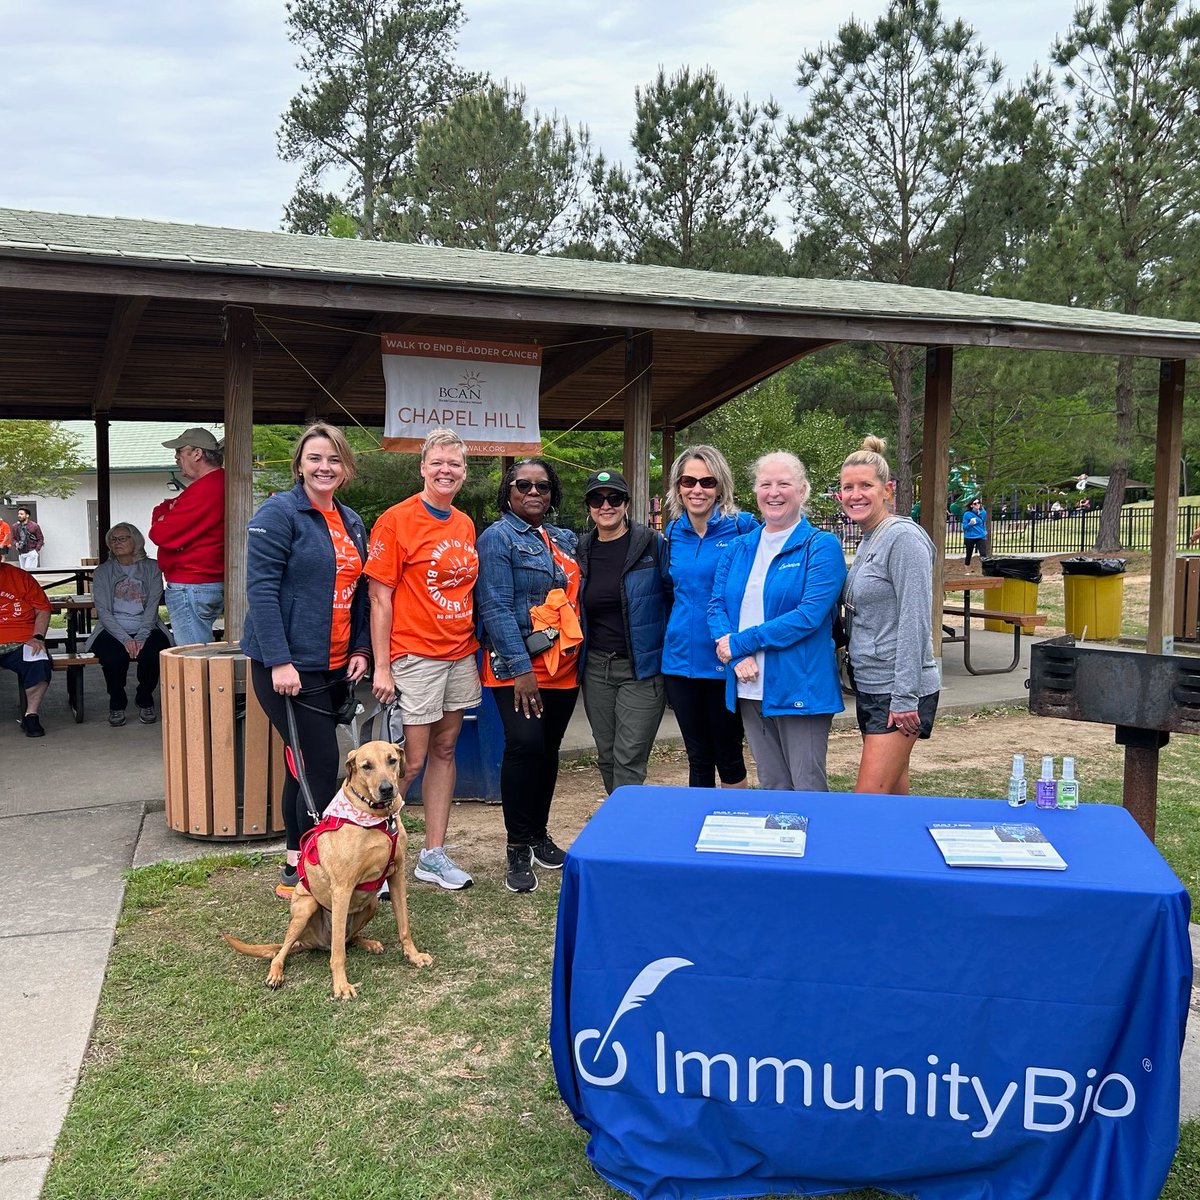 #ChapelHill @BCAN #Bladdercancer Walk: ImmunityBio is proud to co-sponsor the BCAN Walk to End Bladder Cancer. Thank you BCAN for the important work you do everyday on behalf of bladder cancer patients and their caregivers.